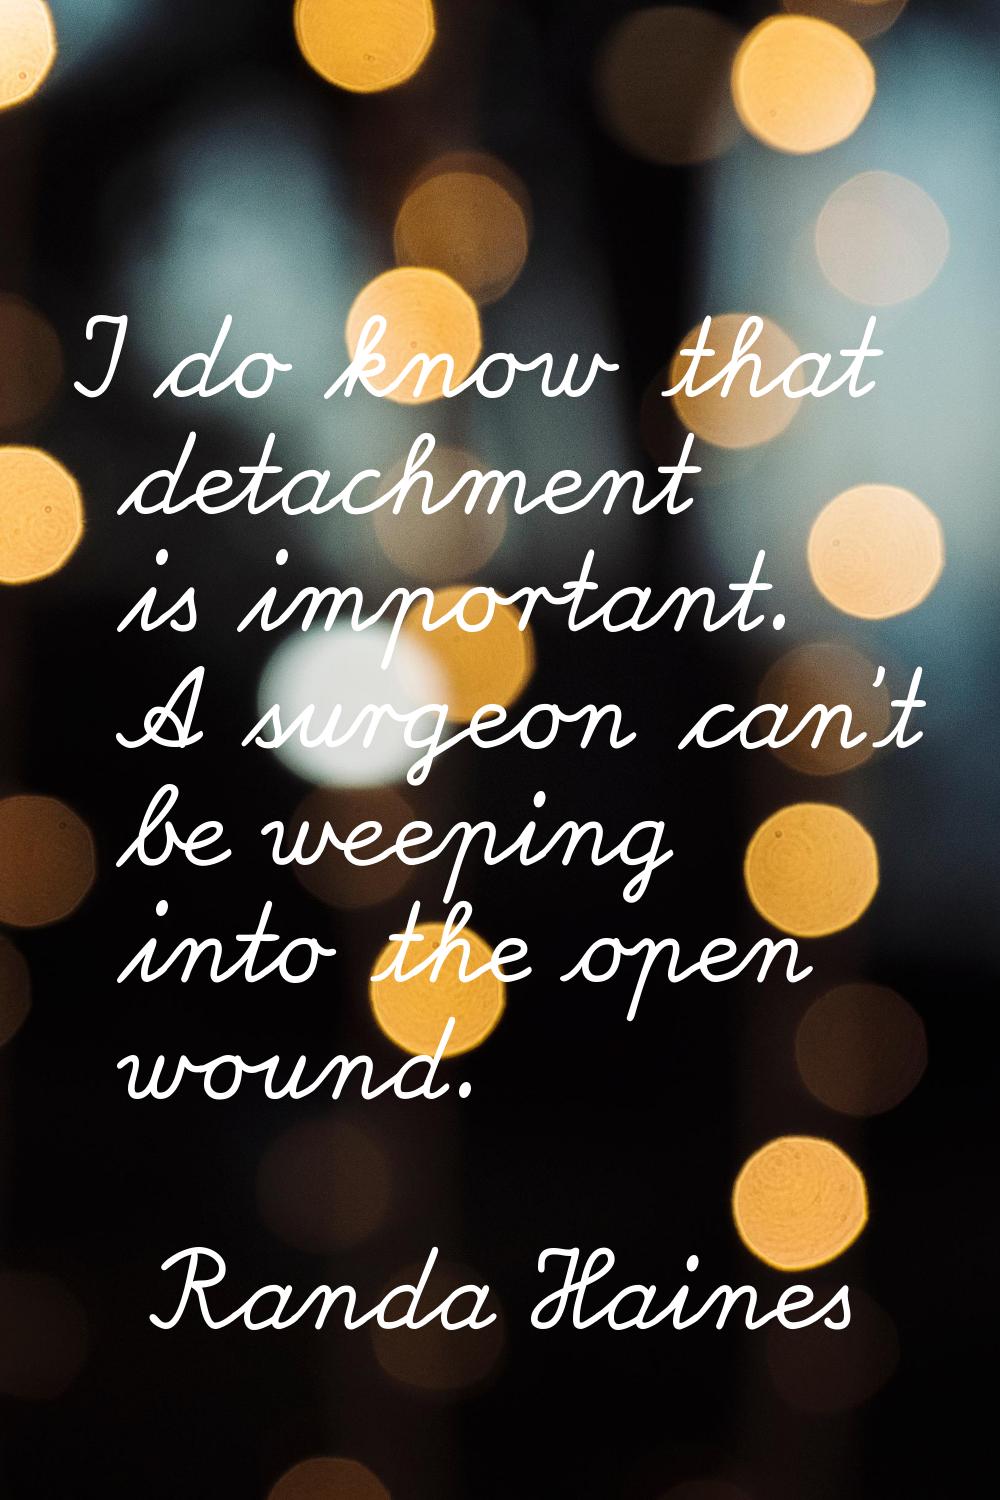 I do know that detachment is important. A surgeon can't be weeping into the open wound.